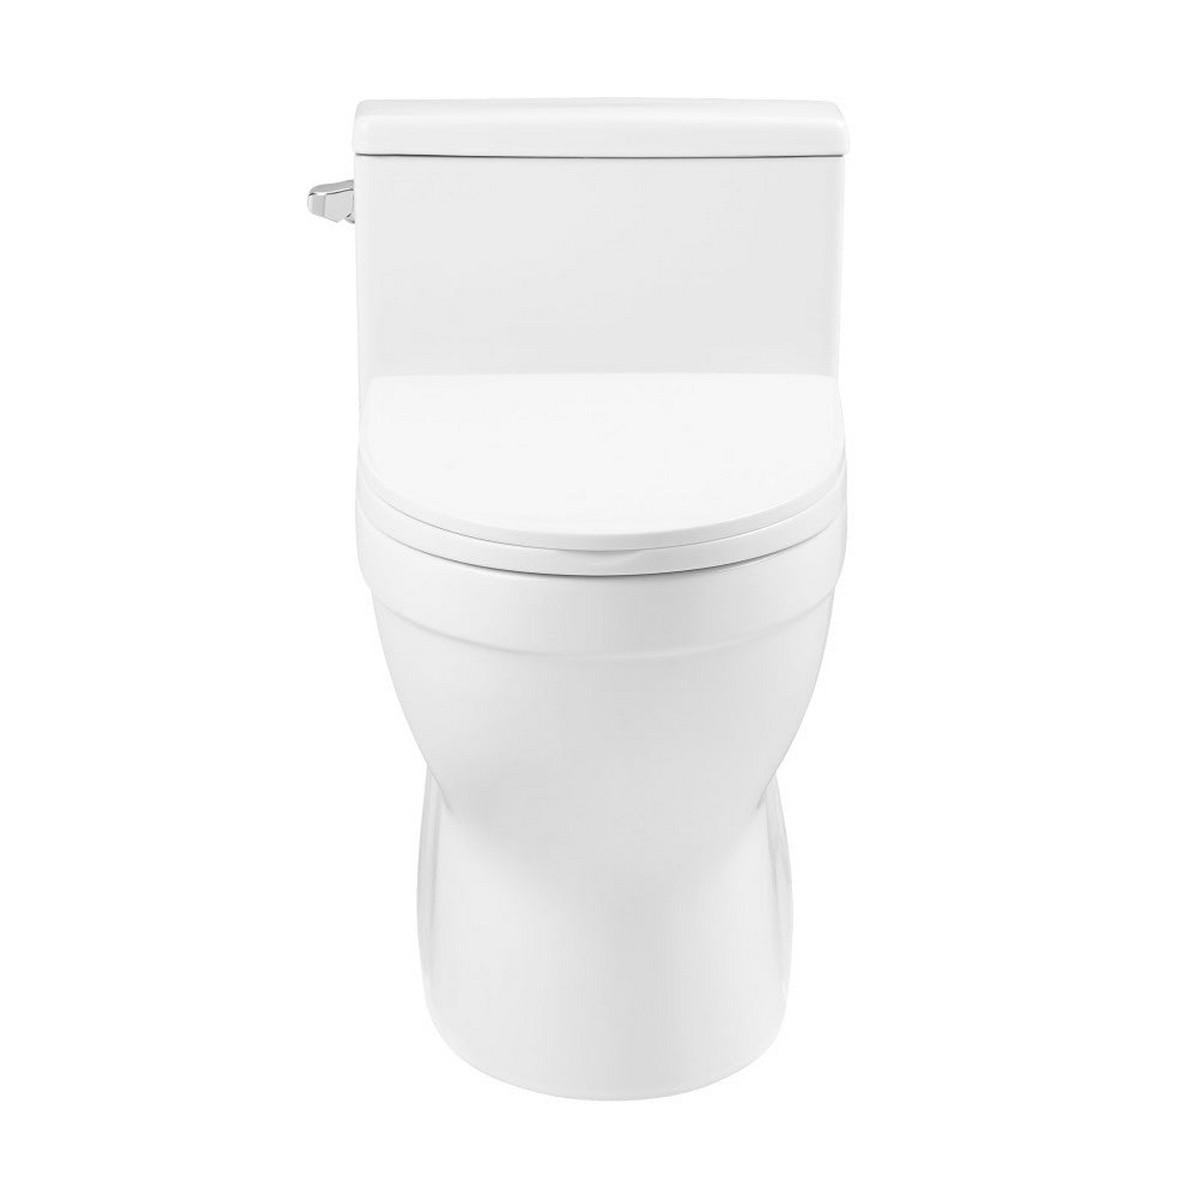 SWISS MADISON CT-1T160 CLICHY 1.28 GPF SIDE FLUSH ONE-PIECE ELONGATED TOILET IN GLOSSY WHITE